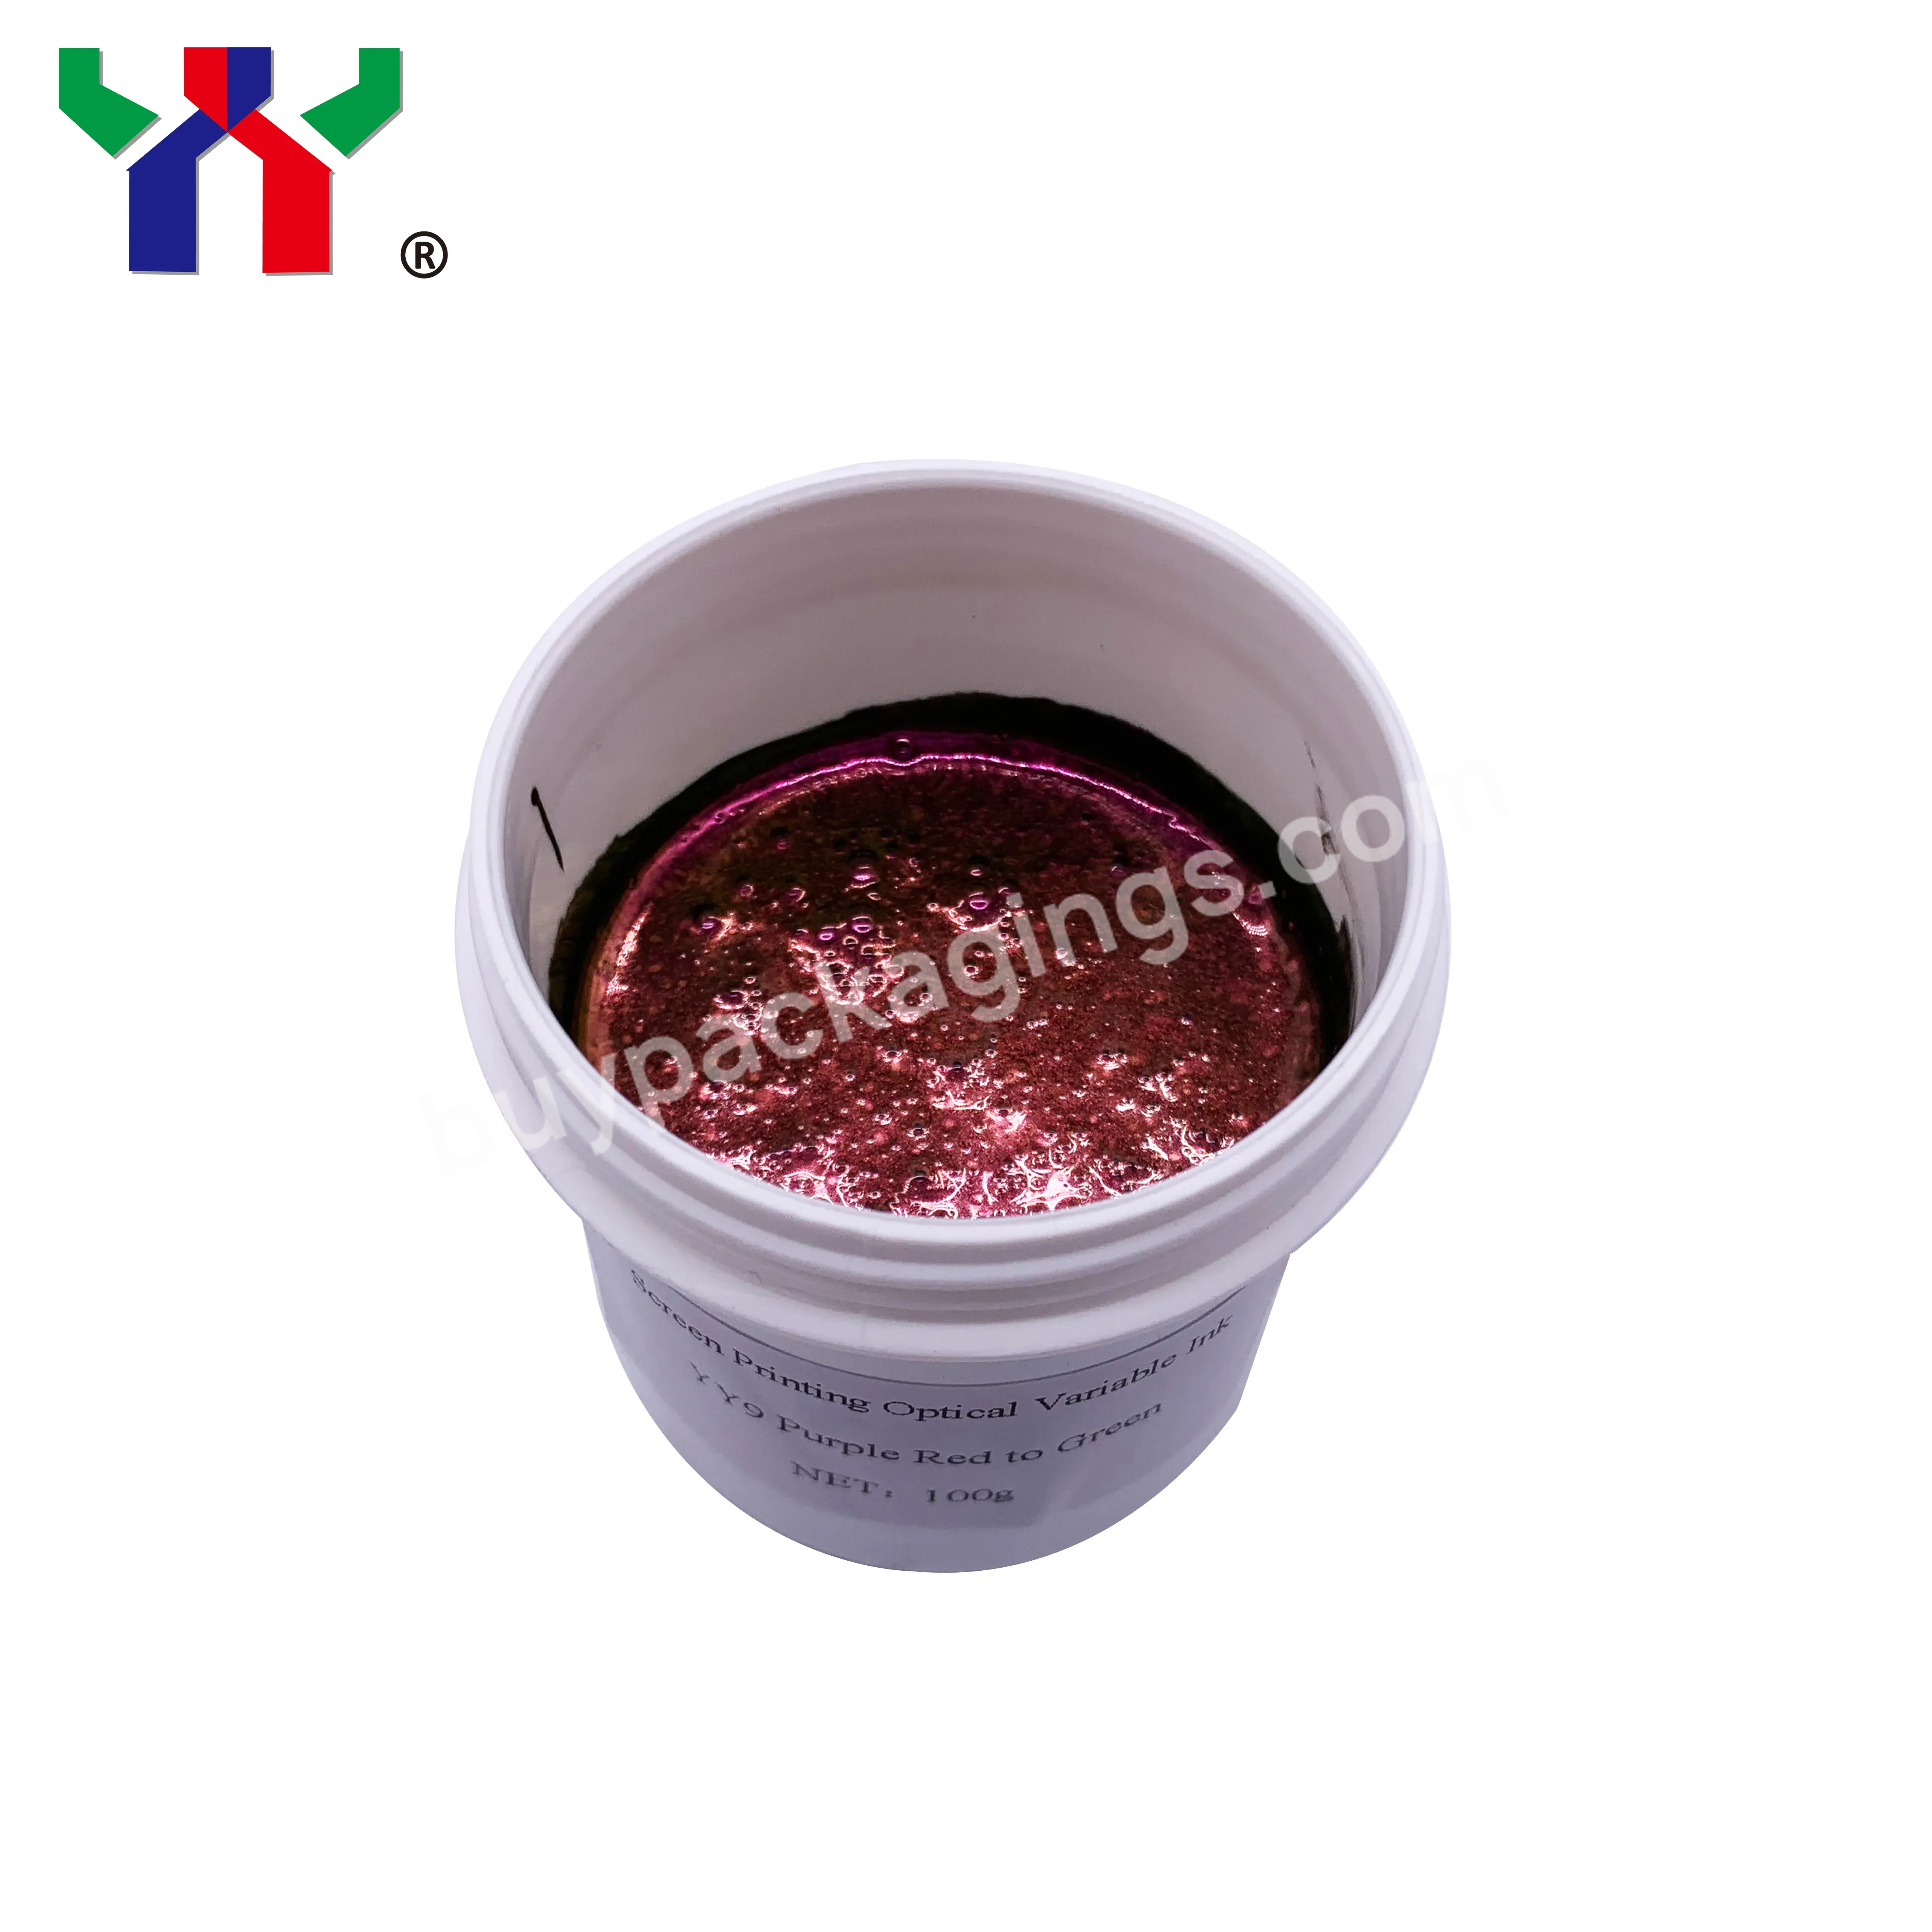 Ceres Screen Printing Optical Variable Ink Yy9 Purple Red To Greren,100 G/bottle - Buy Optical Variable Ink,Screen Printing Optical Variable Ink,Screen Printing Ink.